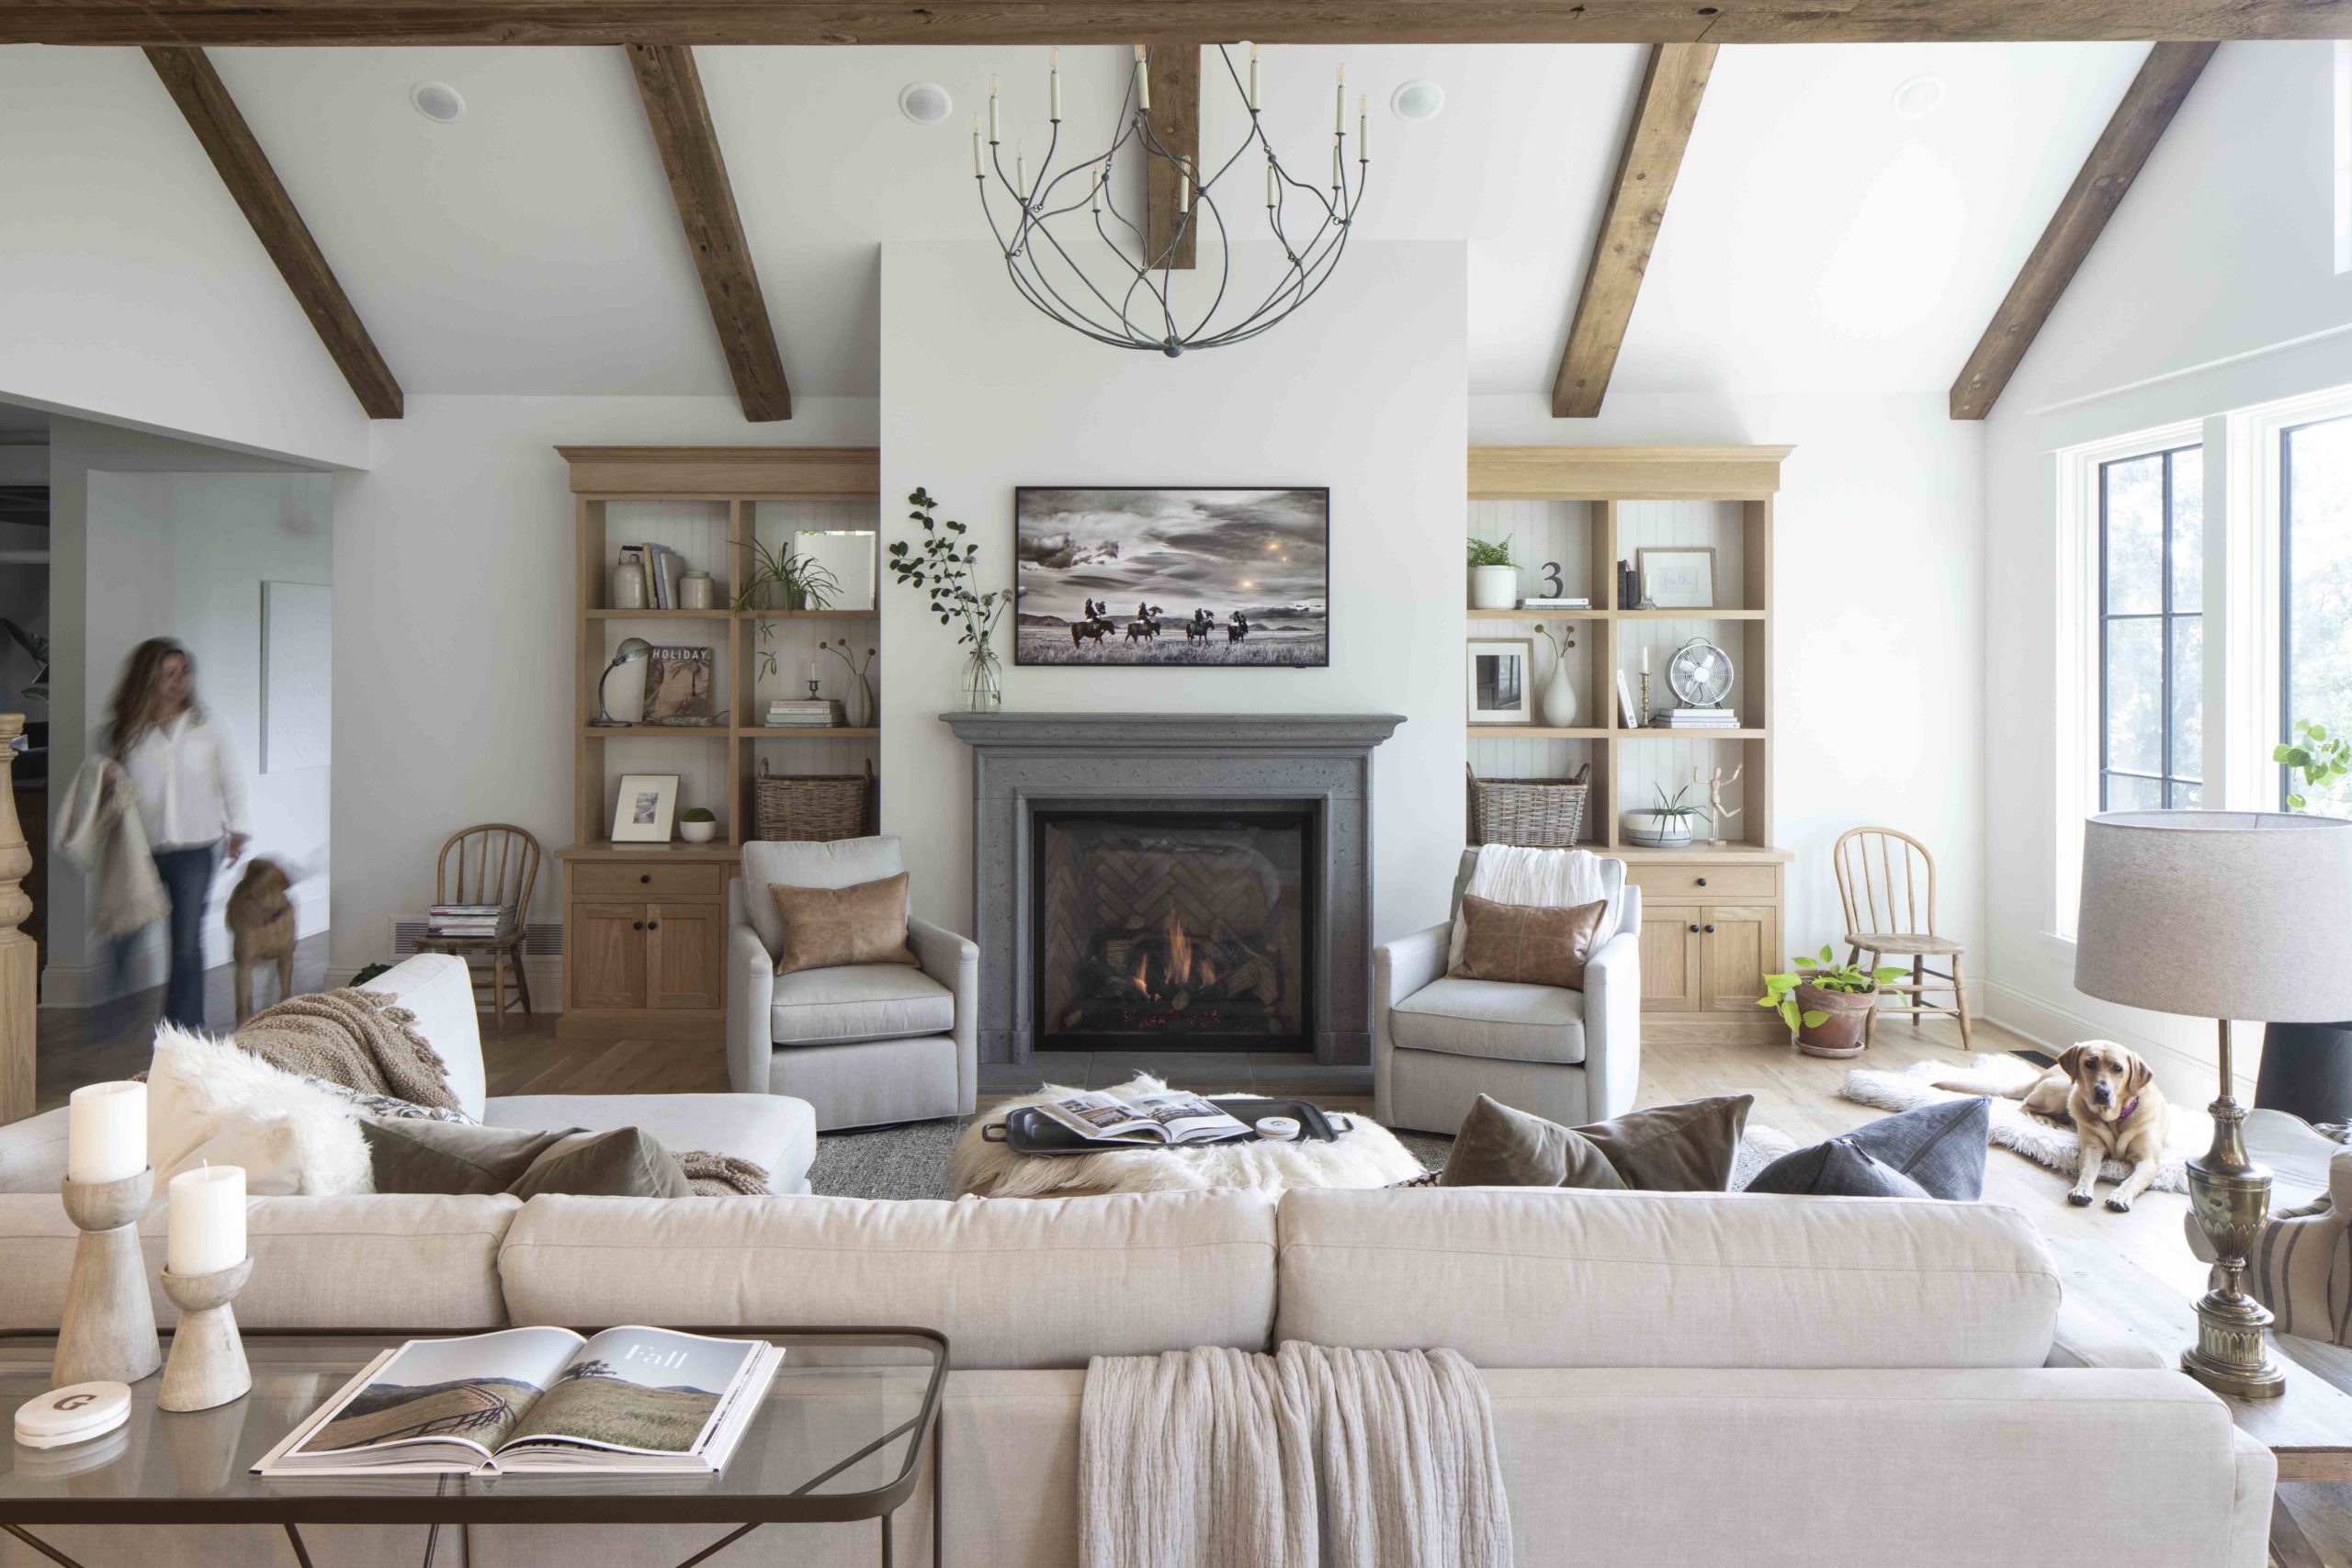 A prairie transitional custom home with wood beams and a fireplace.